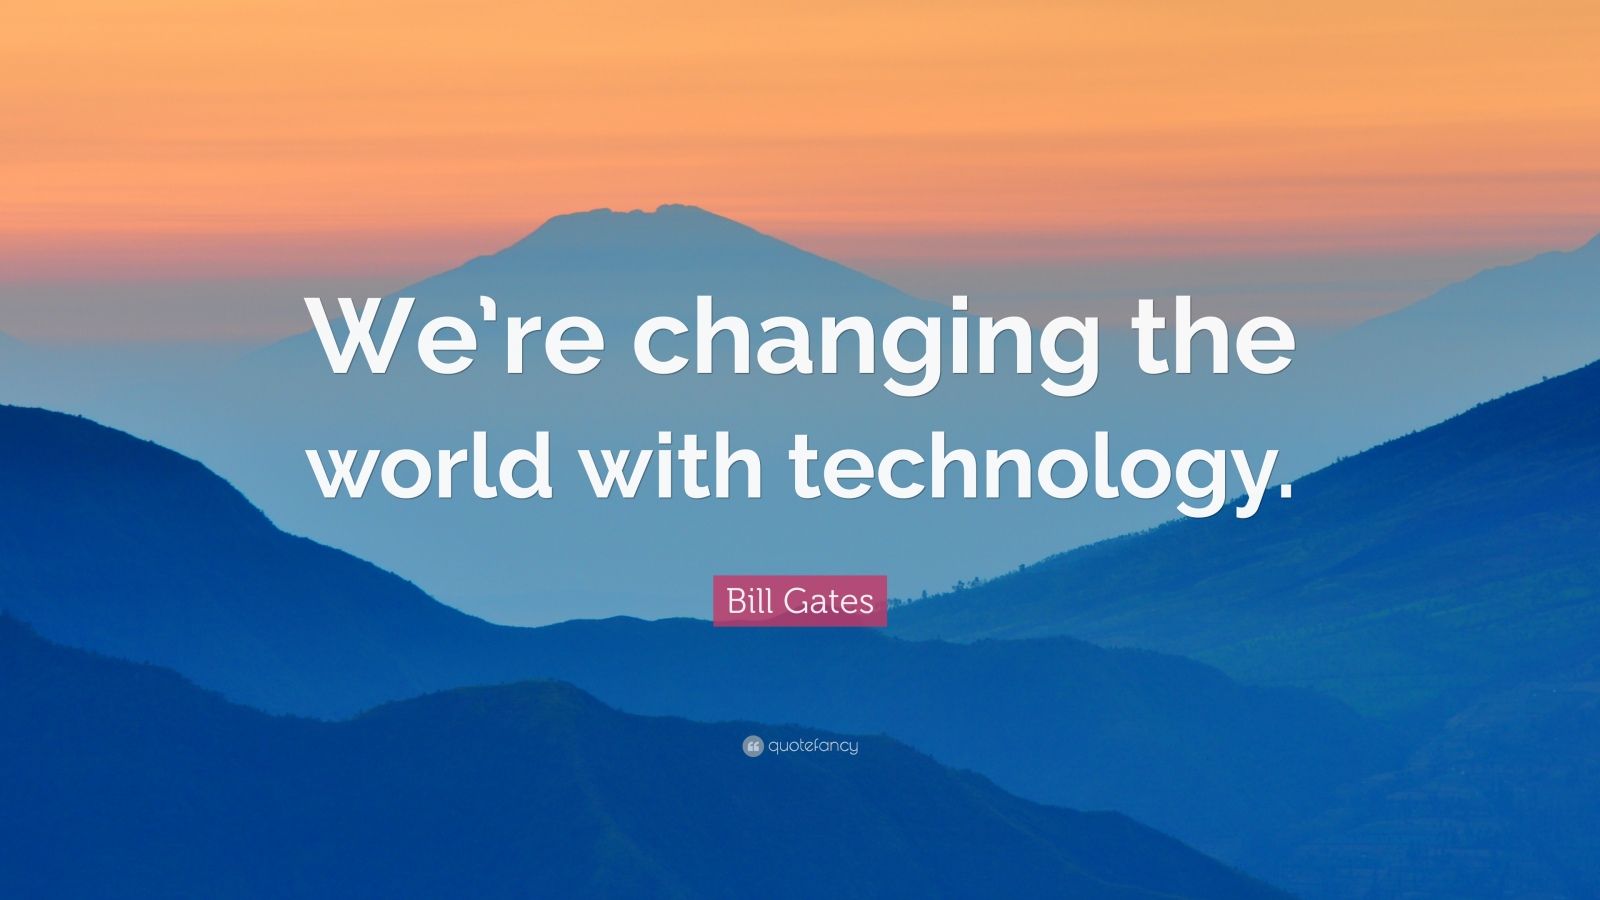 Top 40 Technology Quotes (2023 Update) - Quotefancy